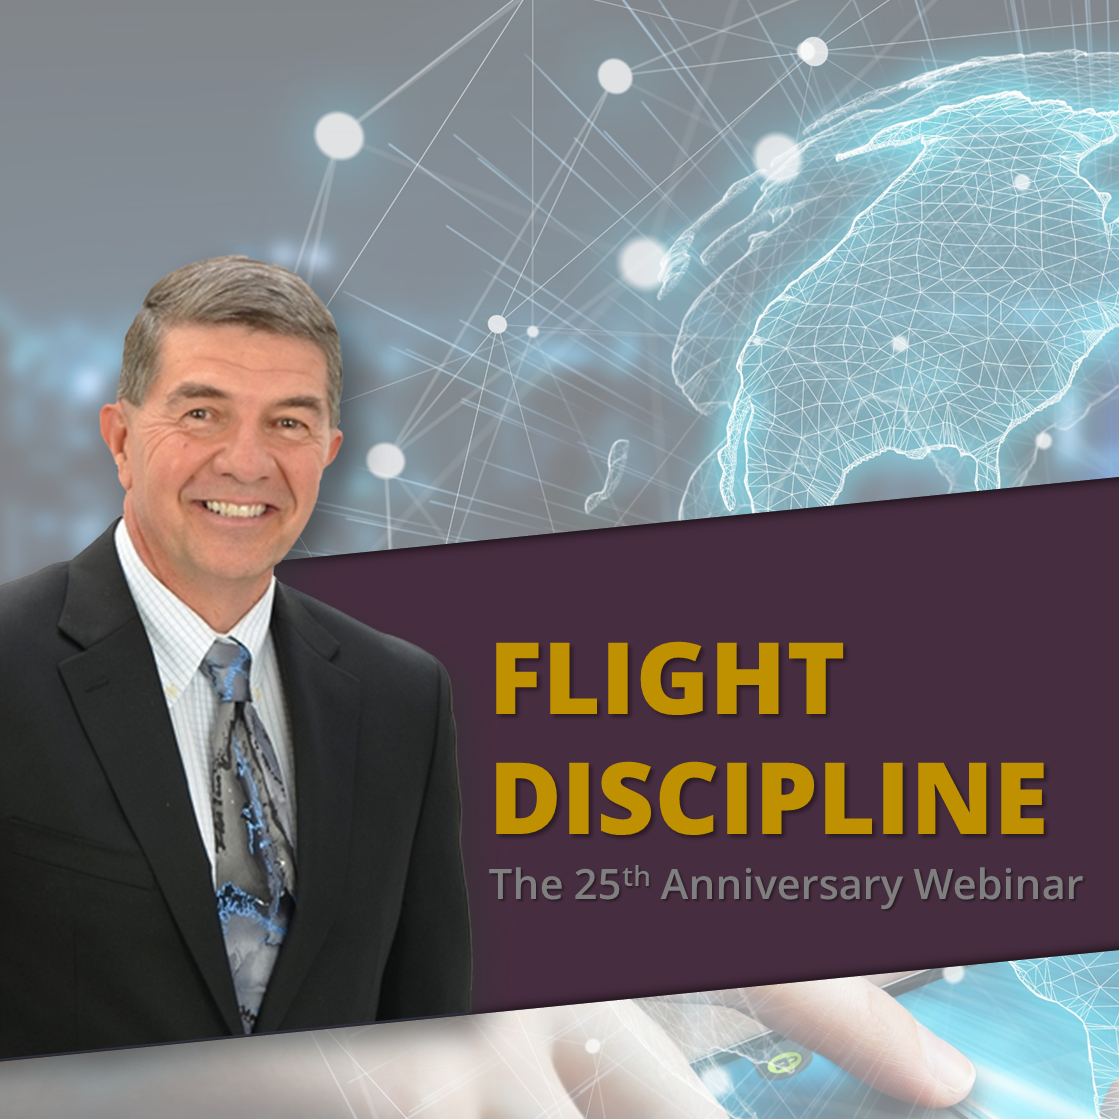 A display banner for the 25th anniversary webinar of the book Flight Discipline, by Dr. Tony Kern.